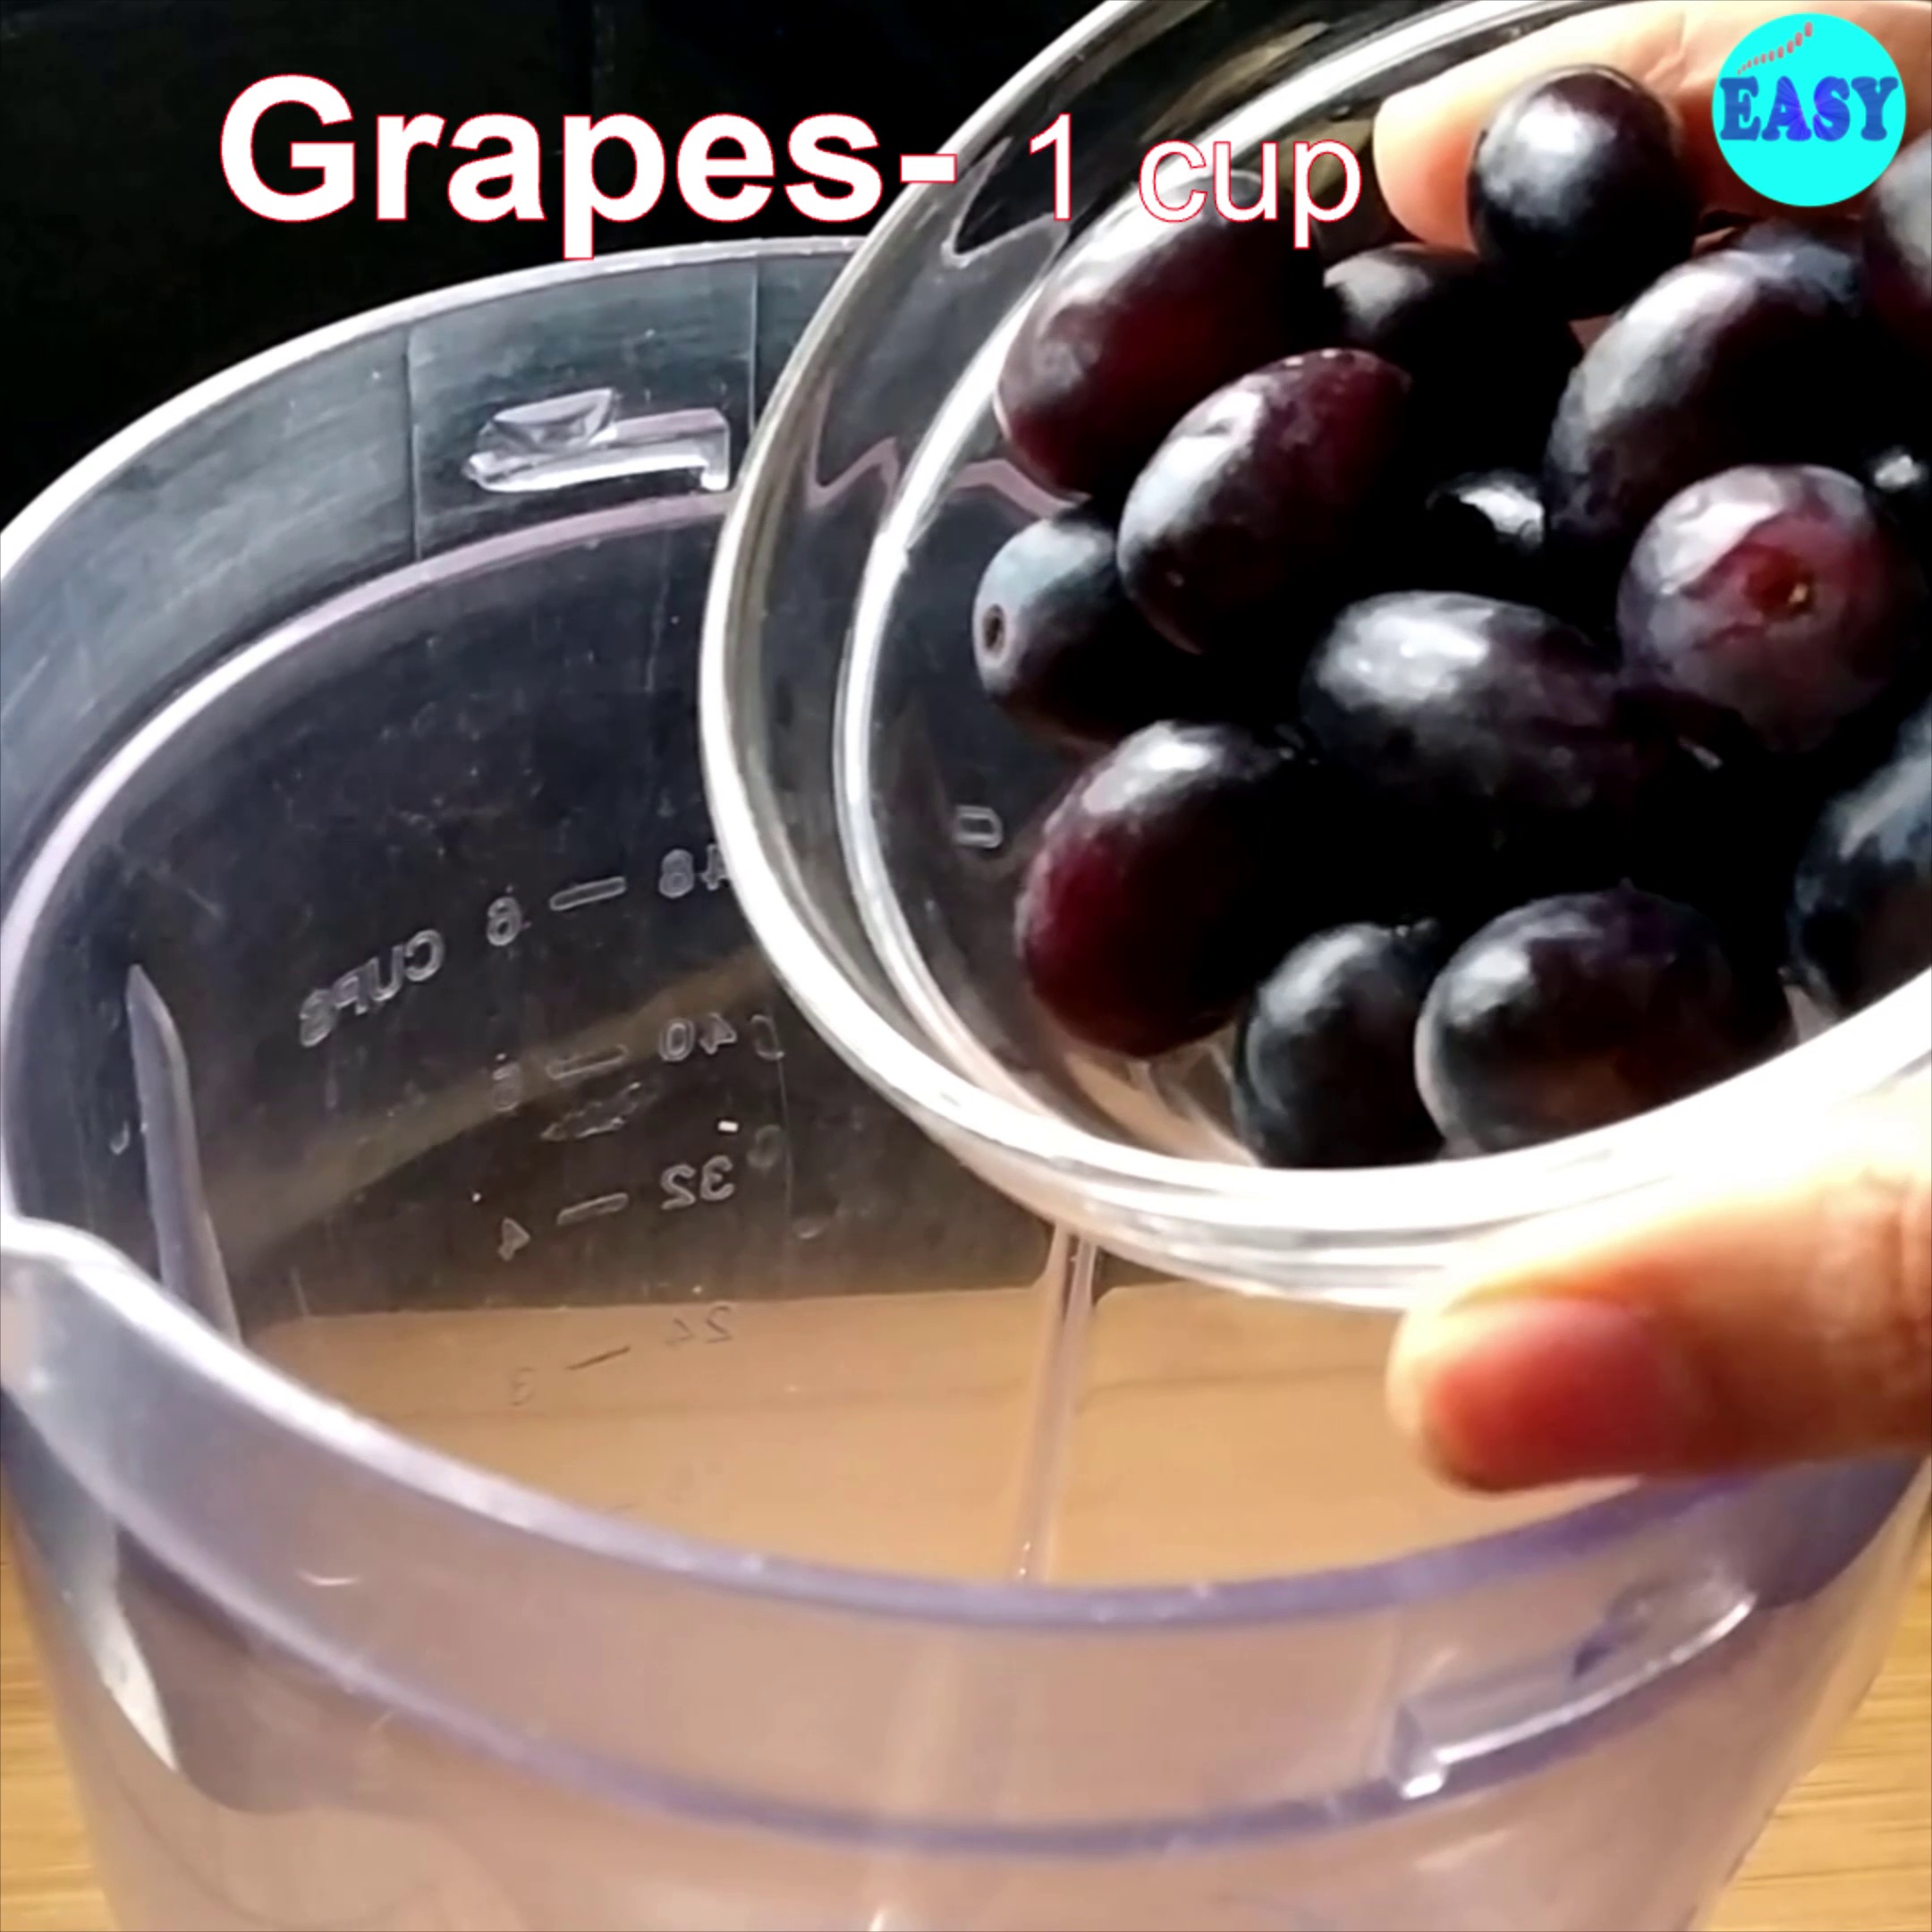 Step 1 - Remove grapes from the stems and place them in a strainer. Discard any grapes that have any hole or other defect. Rinse grapes well to wash off any dirt. Now for making sugar free drink take a blender jar and add all the ingredients in it.